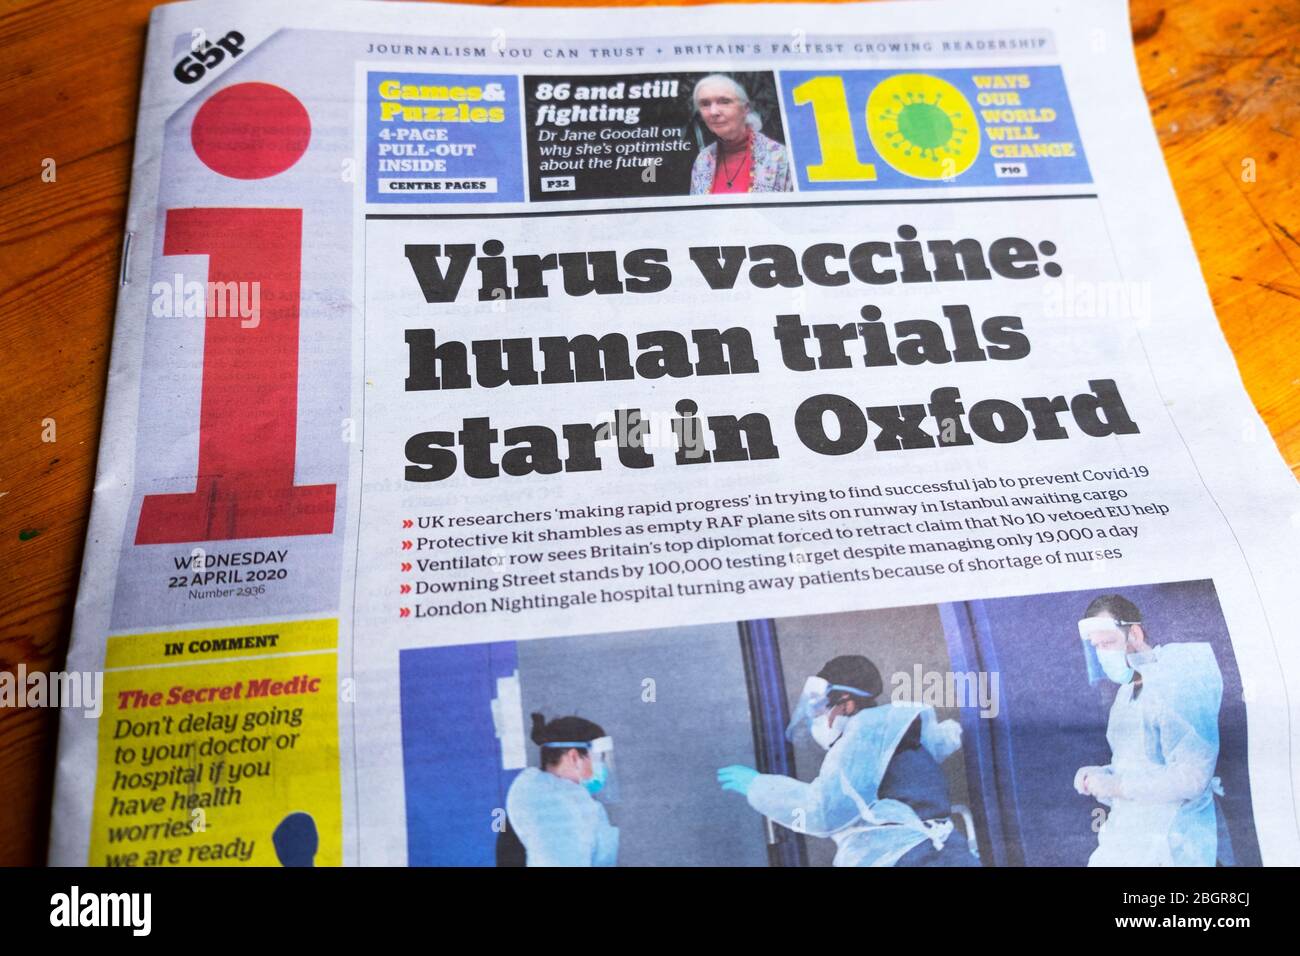 Coronavirus Covid-19 trial research 'Virus vaccine: human trials start in Oxford' i newspaper front page headline 22 April 2020 London England UK Stock Photo